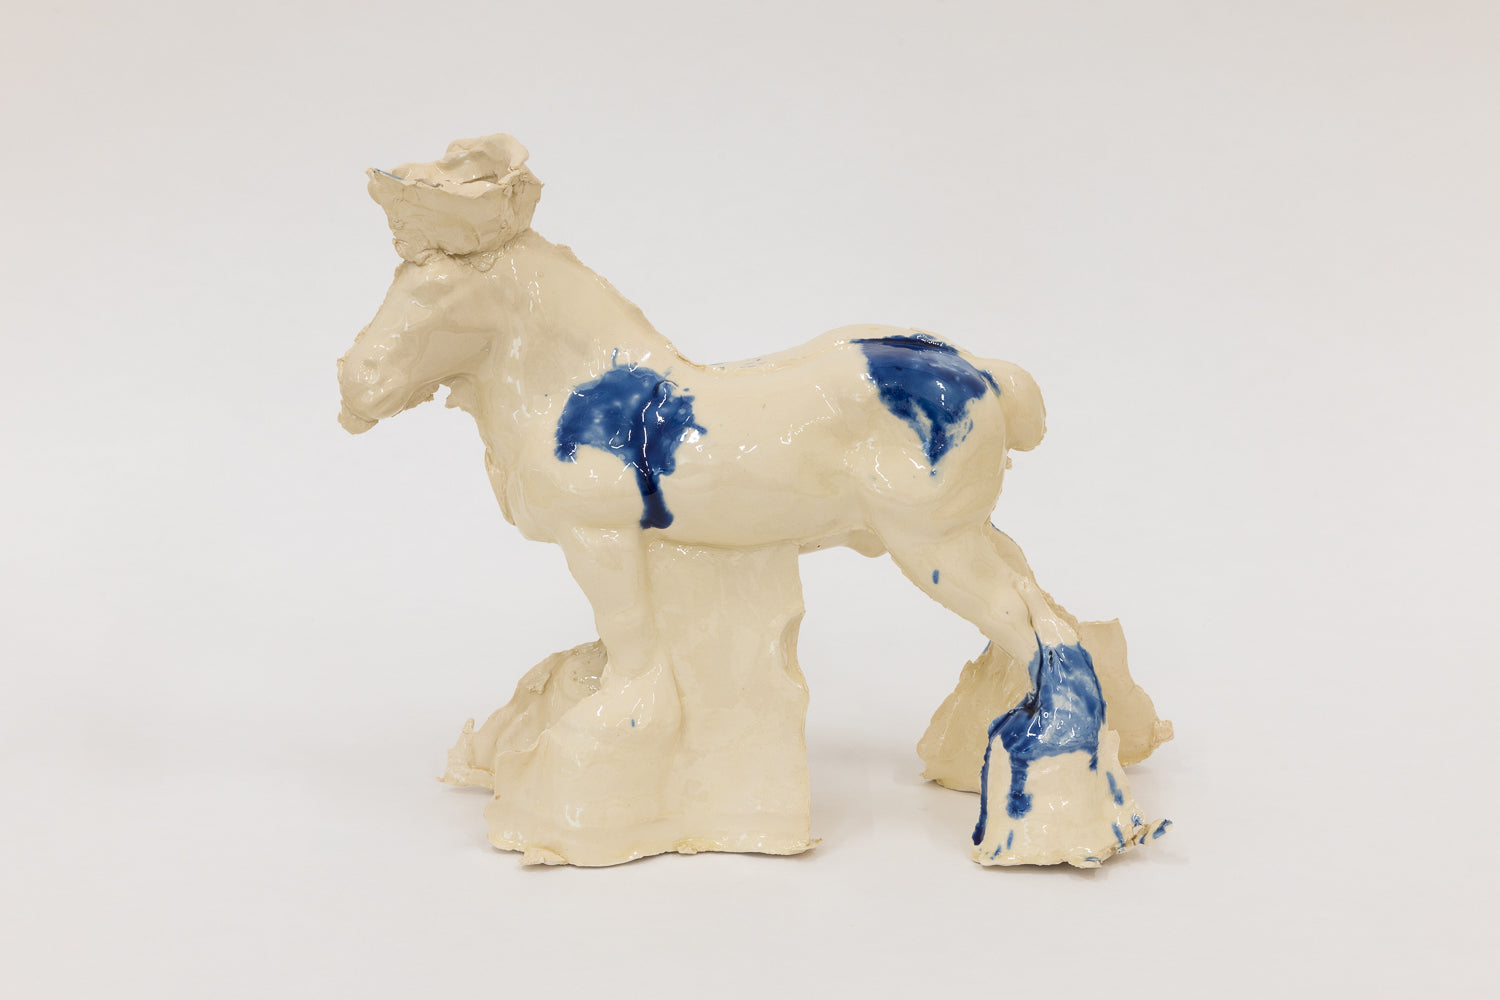 A Dreaming of the Shires (Creamware Blue 1), Jack Ky Tan